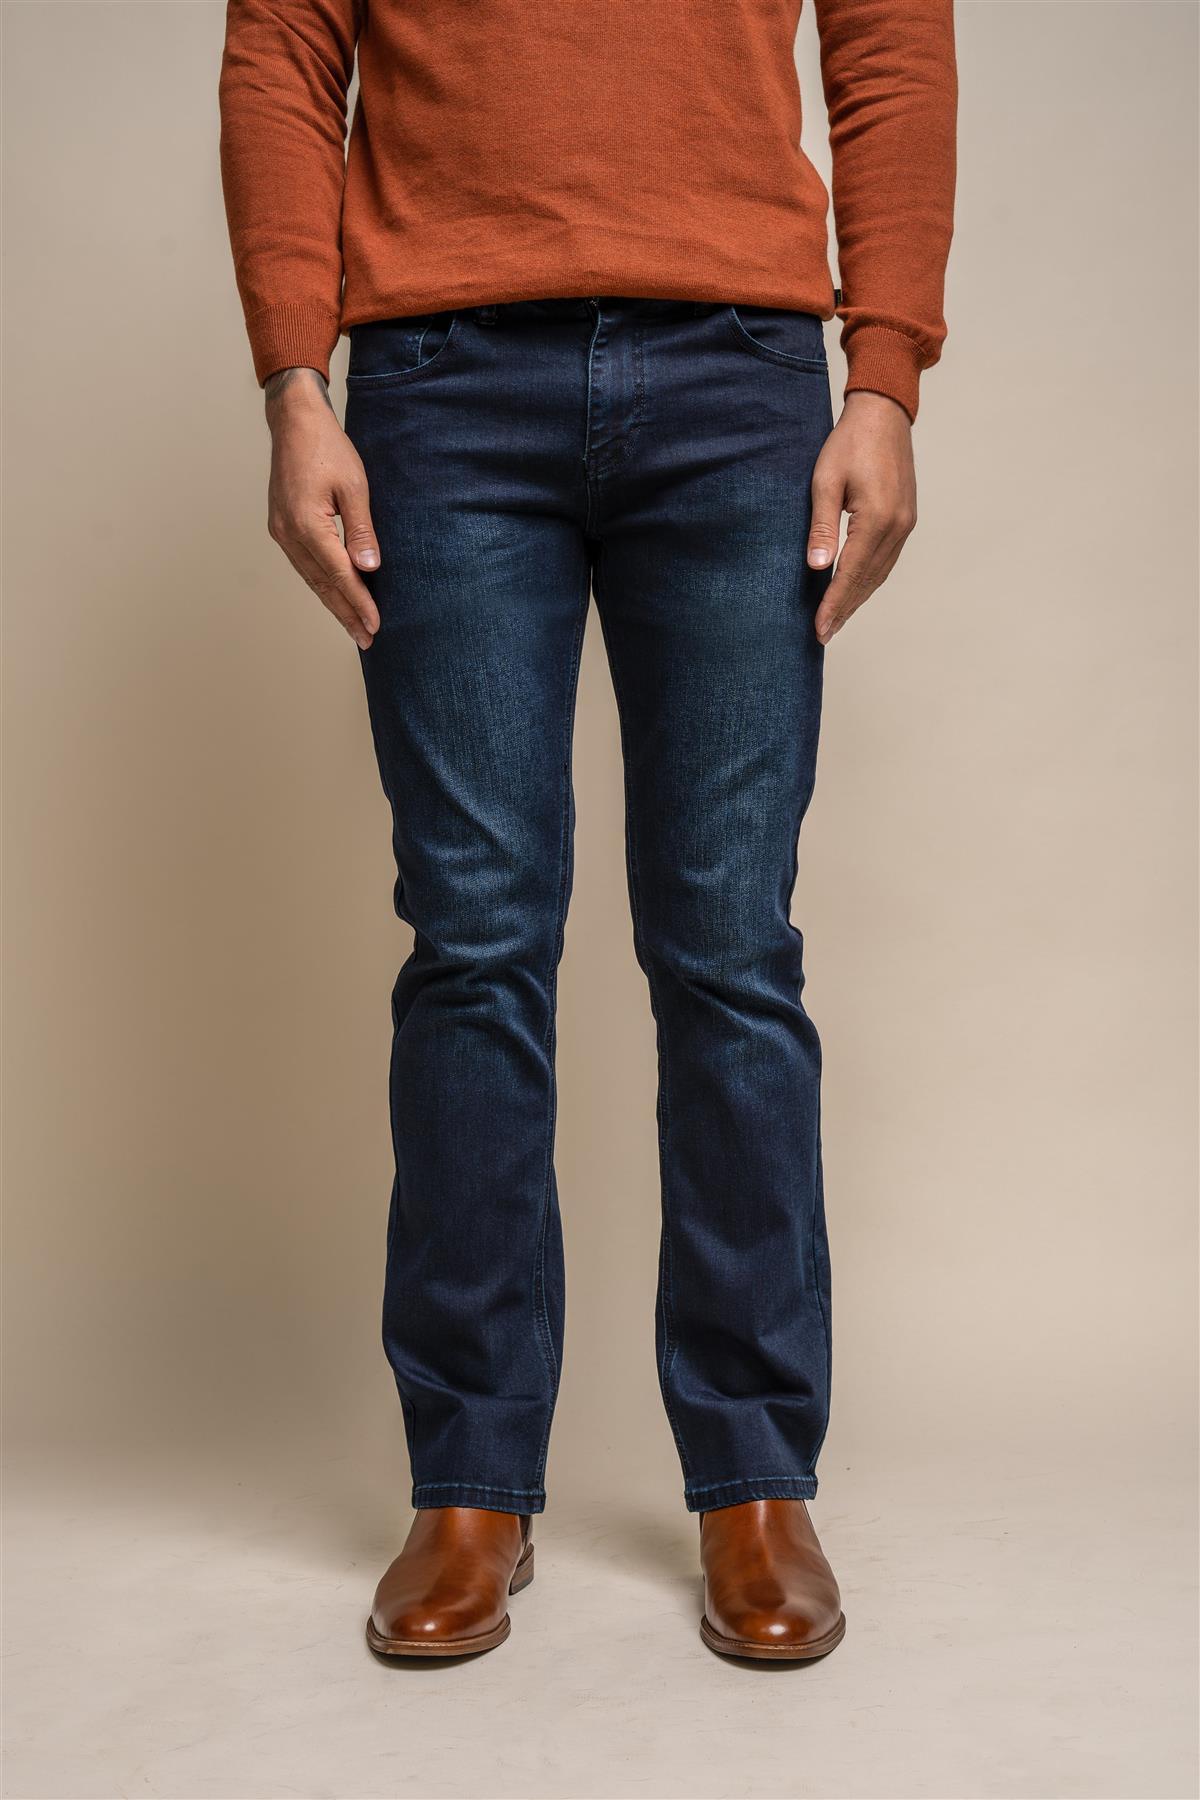 Dempsey navy jean front